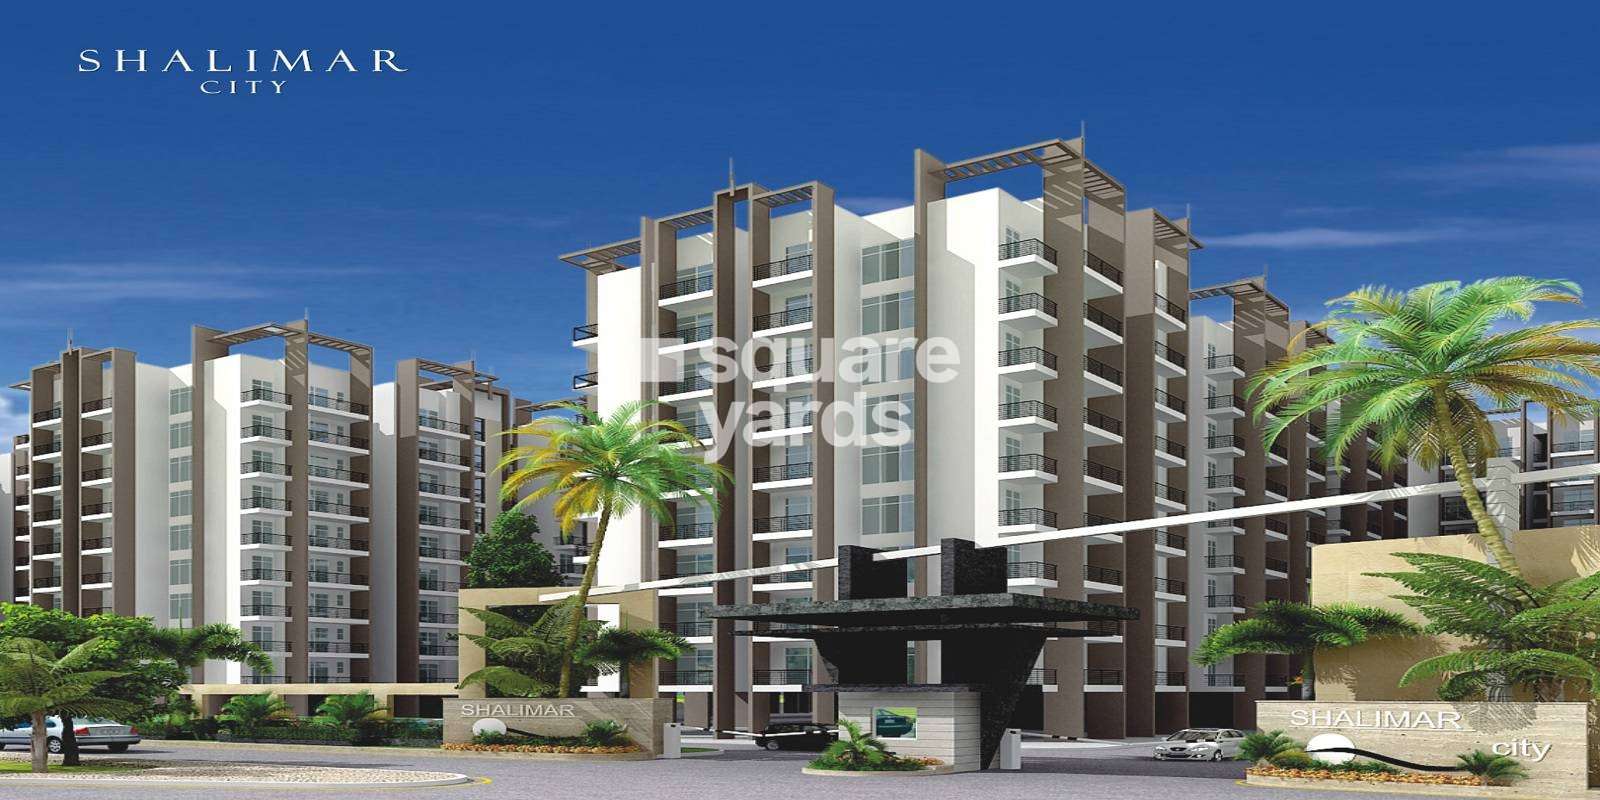 Proview Shalimar City Phase II Cover Image